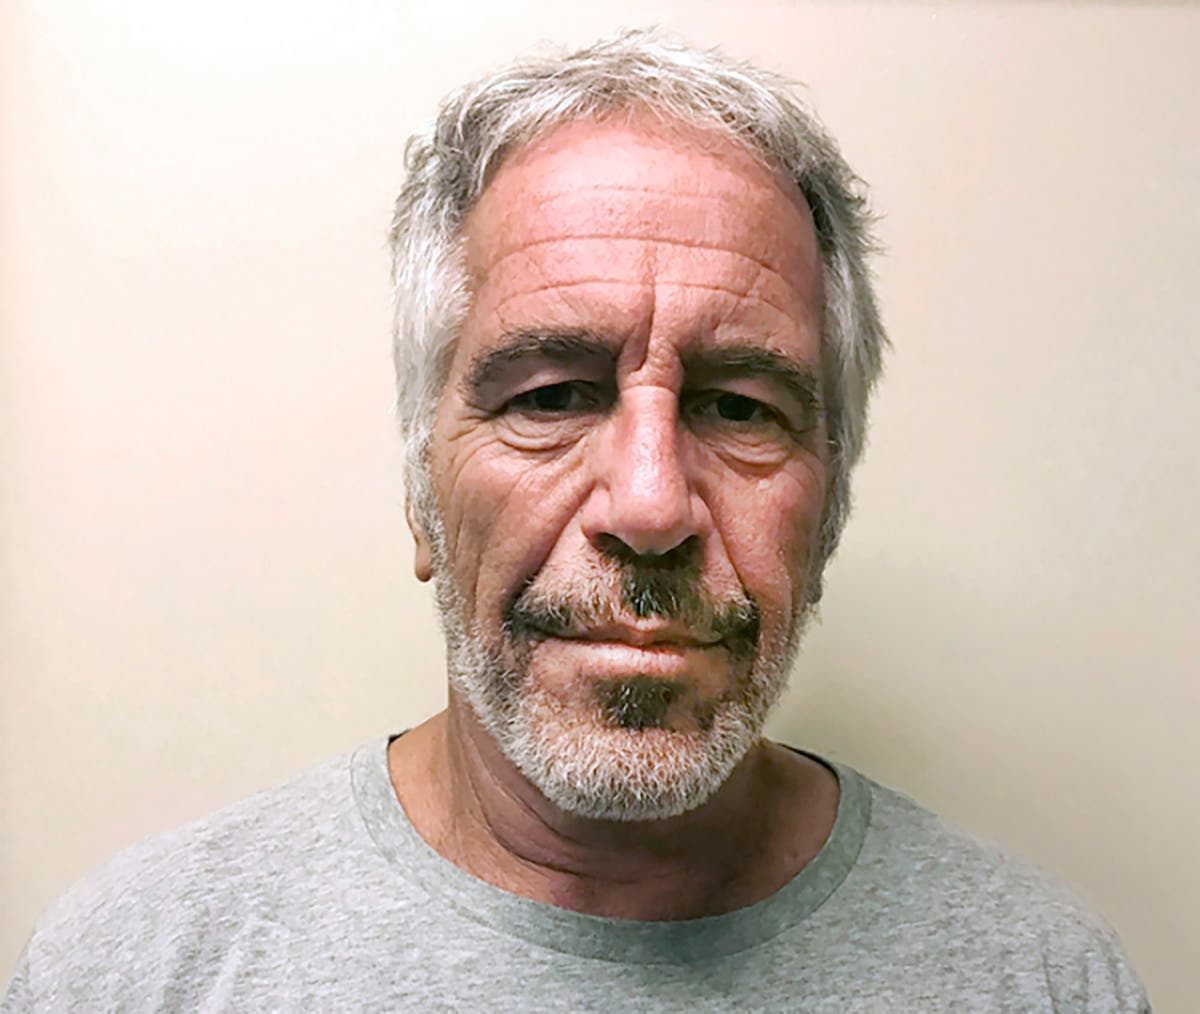 Judge orders charges dropped against Epstein jail guards